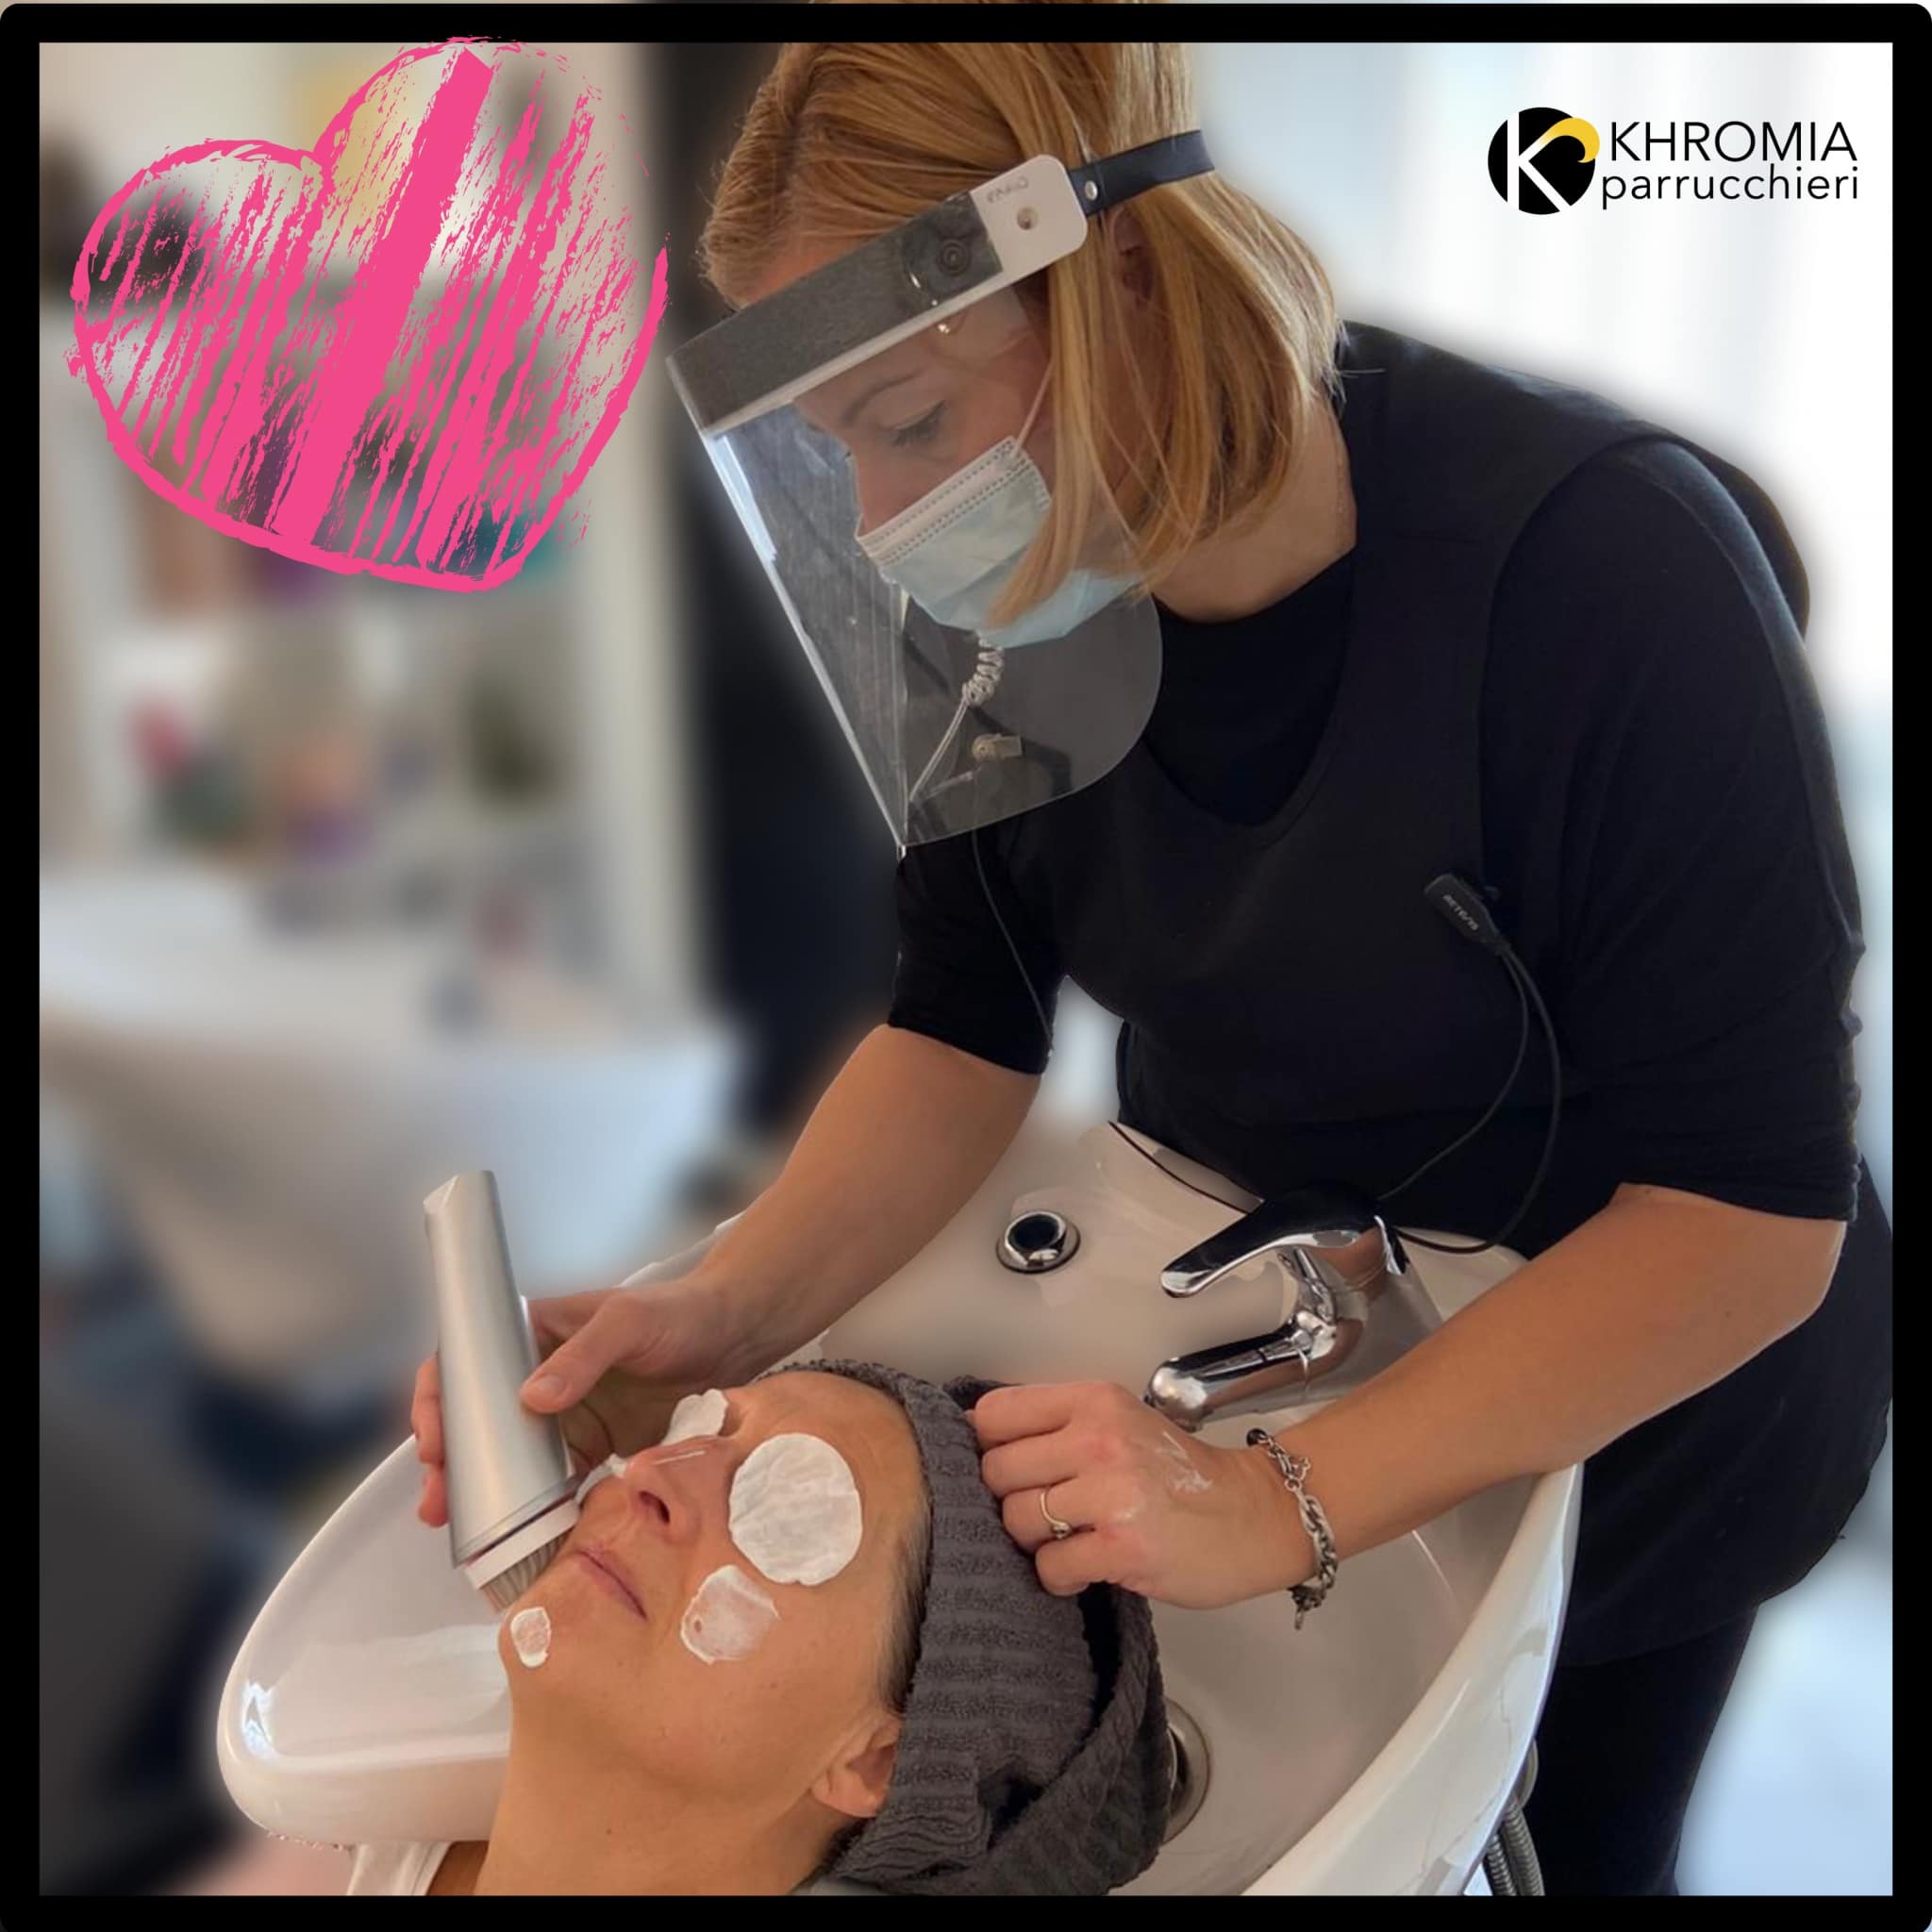 Rituale Fast Beauty Experience by KHROMIA Parrucchieri